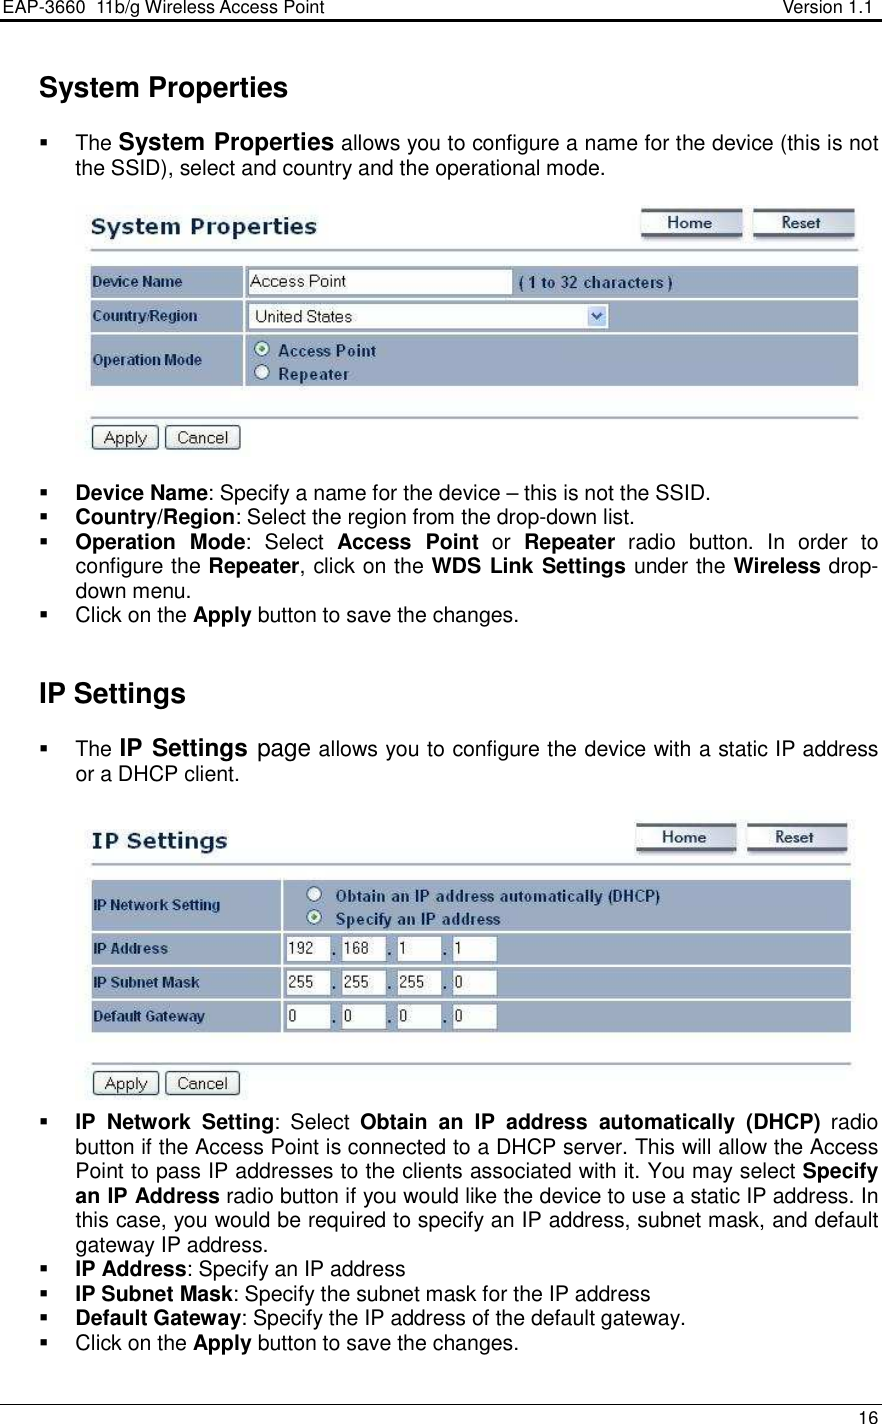 EAP-3660  11b/g Wireless Access Point                                                           Version 1.1    16    System Properties   The System Properties allows you to configure a name for the device (this is not the SSID), select and country and the operational mode.      Device Name: Specify a name for the device – this is not the SSID.   Country/Region: Select the region from the drop-down list.  Operation  Mode:  Select  Access  Point  or  Repeater  radio  button.  In  order  to configure the Repeater, click on the WDS Link Settings under the Wireless drop-down menu.    Click on the Apply button to save the changes.        IP Settings   The IP Settings page allows you to configure the device with a static IP address or a DHCP client.      IP  Network  Setting:  Select  Obtain  an  IP  address  automatically  (DHCP)  radio button if the Access Point is connected to a DHCP server. This will allow the Access Point to pass IP addresses to the clients associated with it. You may select Specify an IP Address radio button if you would like the device to use a static IP address. In this case, you would be required to specify an IP address, subnet mask, and default gateway IP address.  IP Address: Specify an IP address  IP Subnet Mask: Specify the subnet mask for the IP address  Default Gateway: Specify the IP address of the default gateway.   Click on the Apply button to save the changes.   